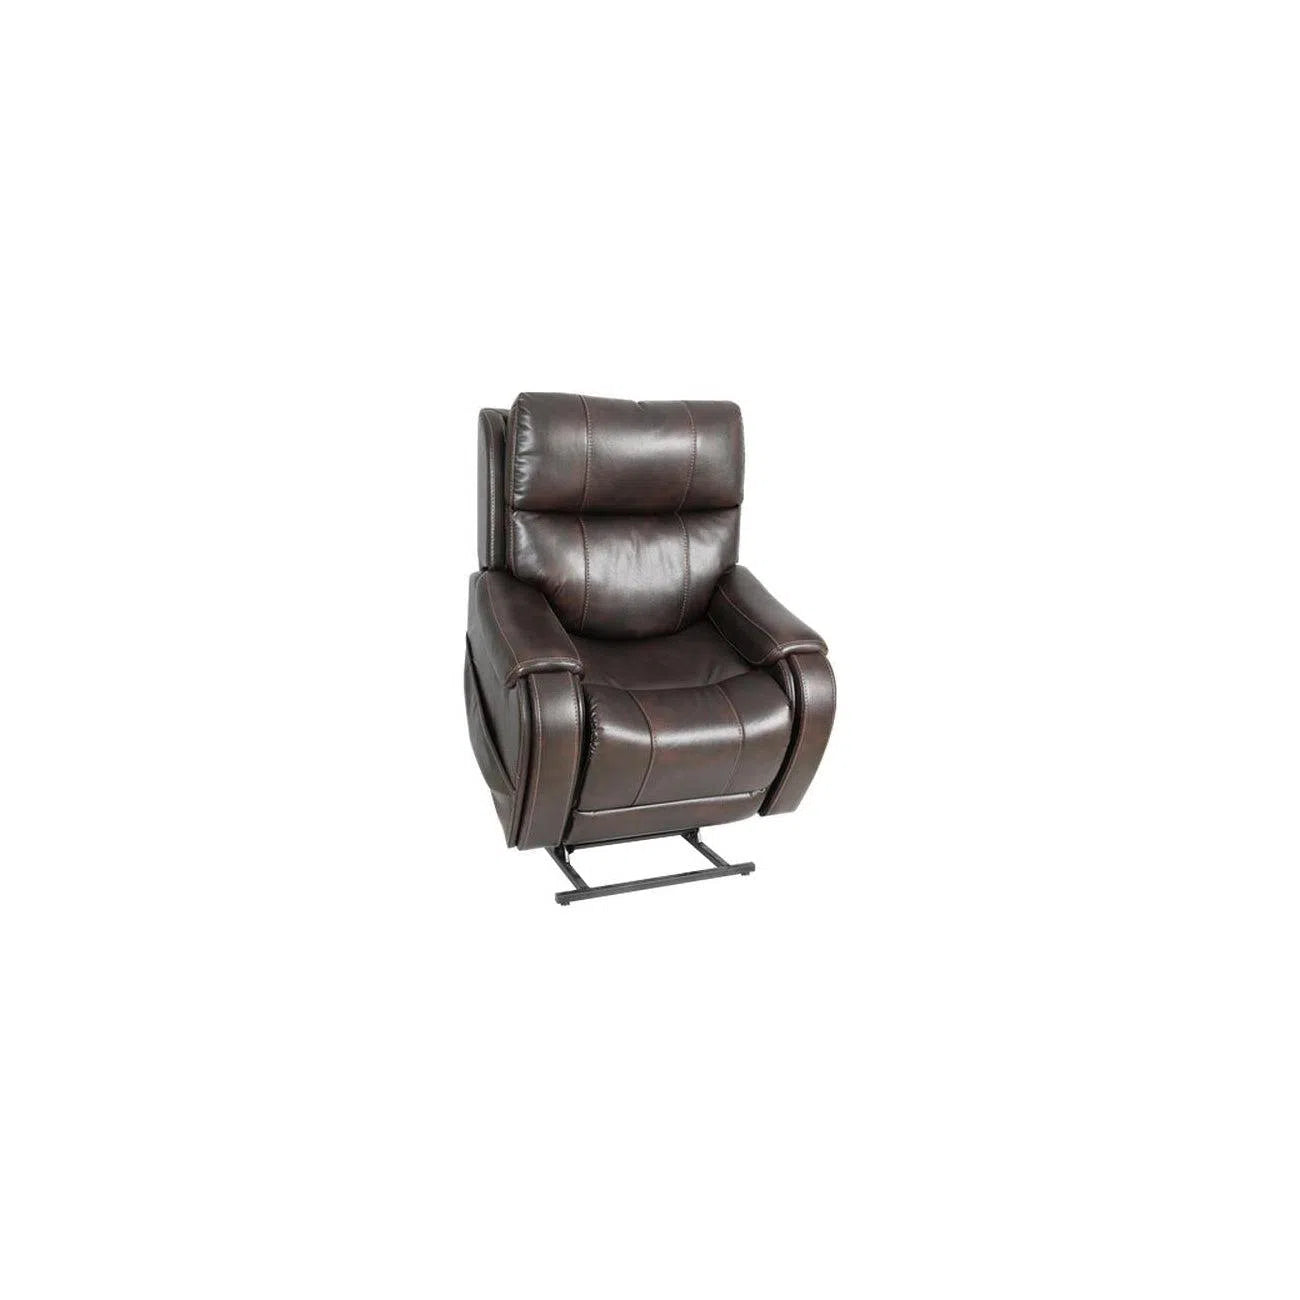 Seagrove Dual Motor 158kg Lift Chair with Cup Holders-Sleep Doctor